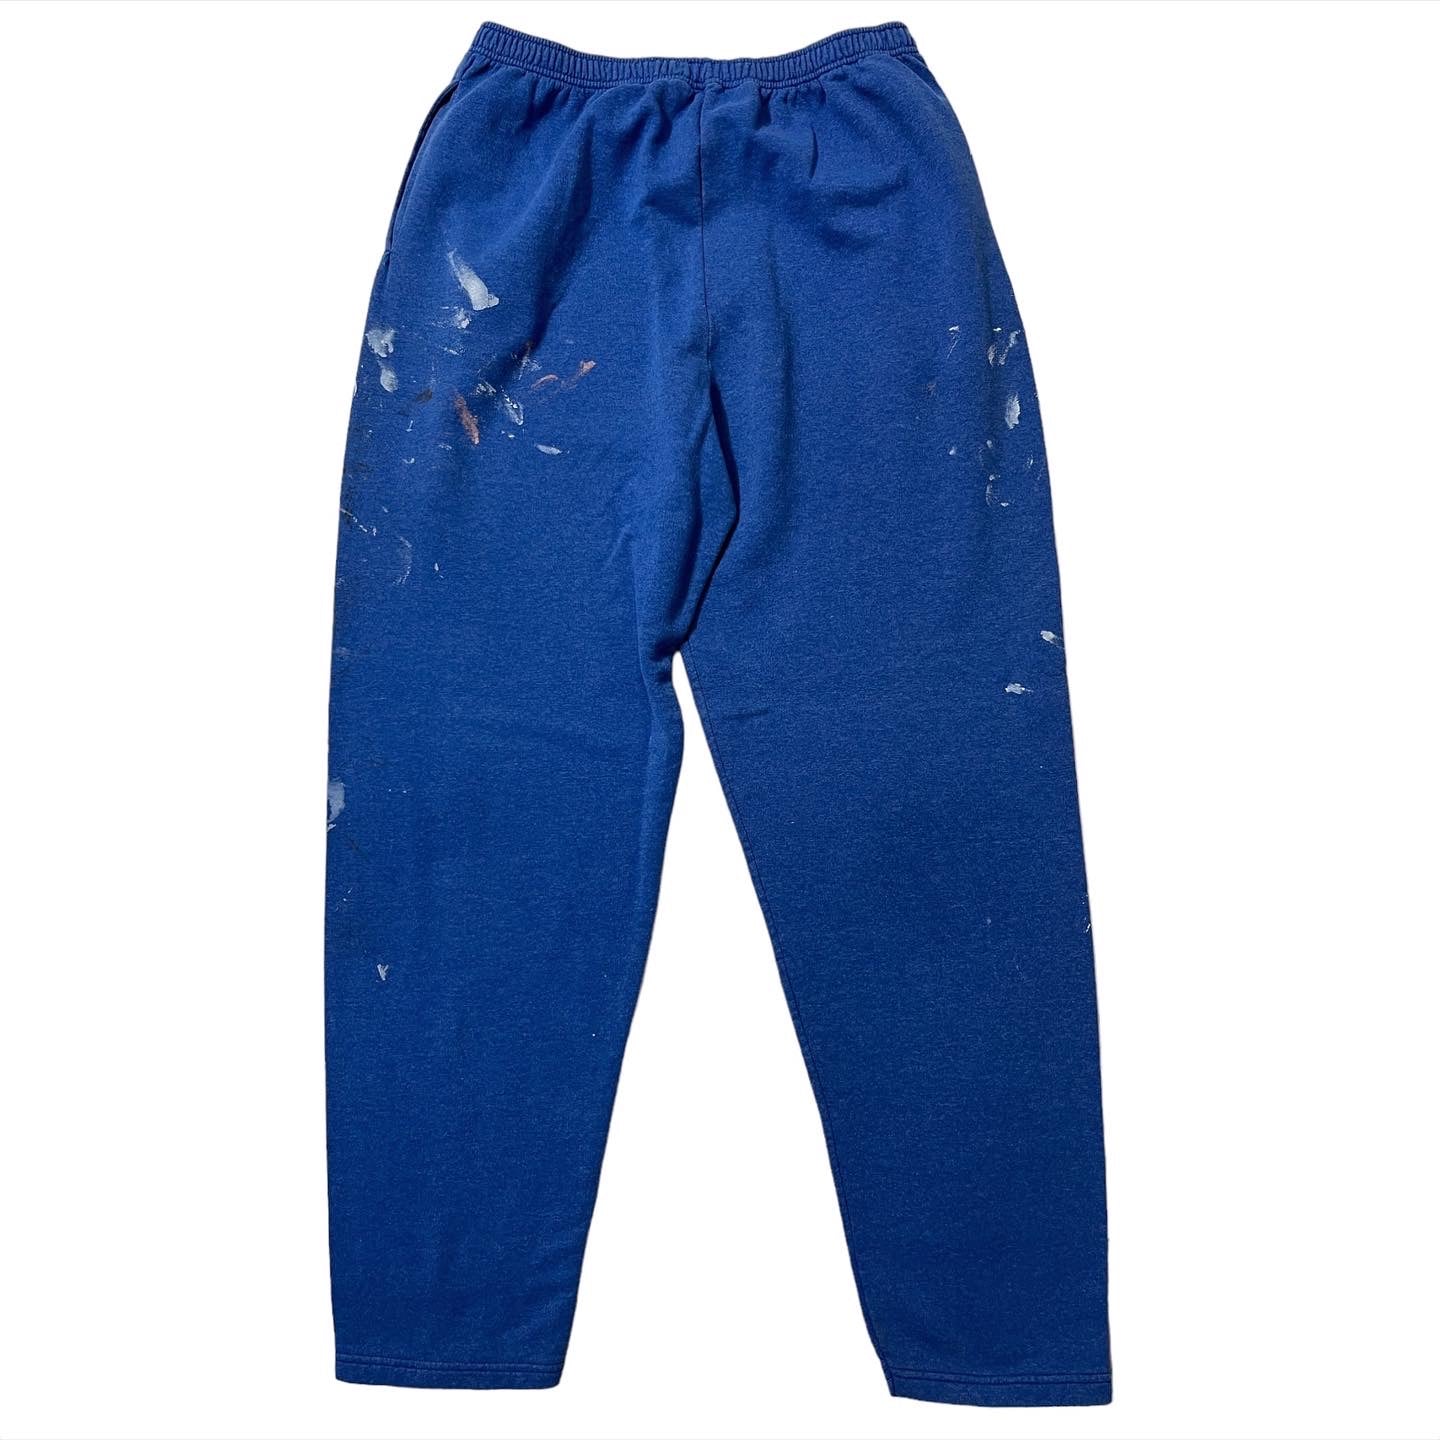 90s Fruit of the Loom ‘Just for Her’ Painter Sweatpants - Cornflower Blue - S/M